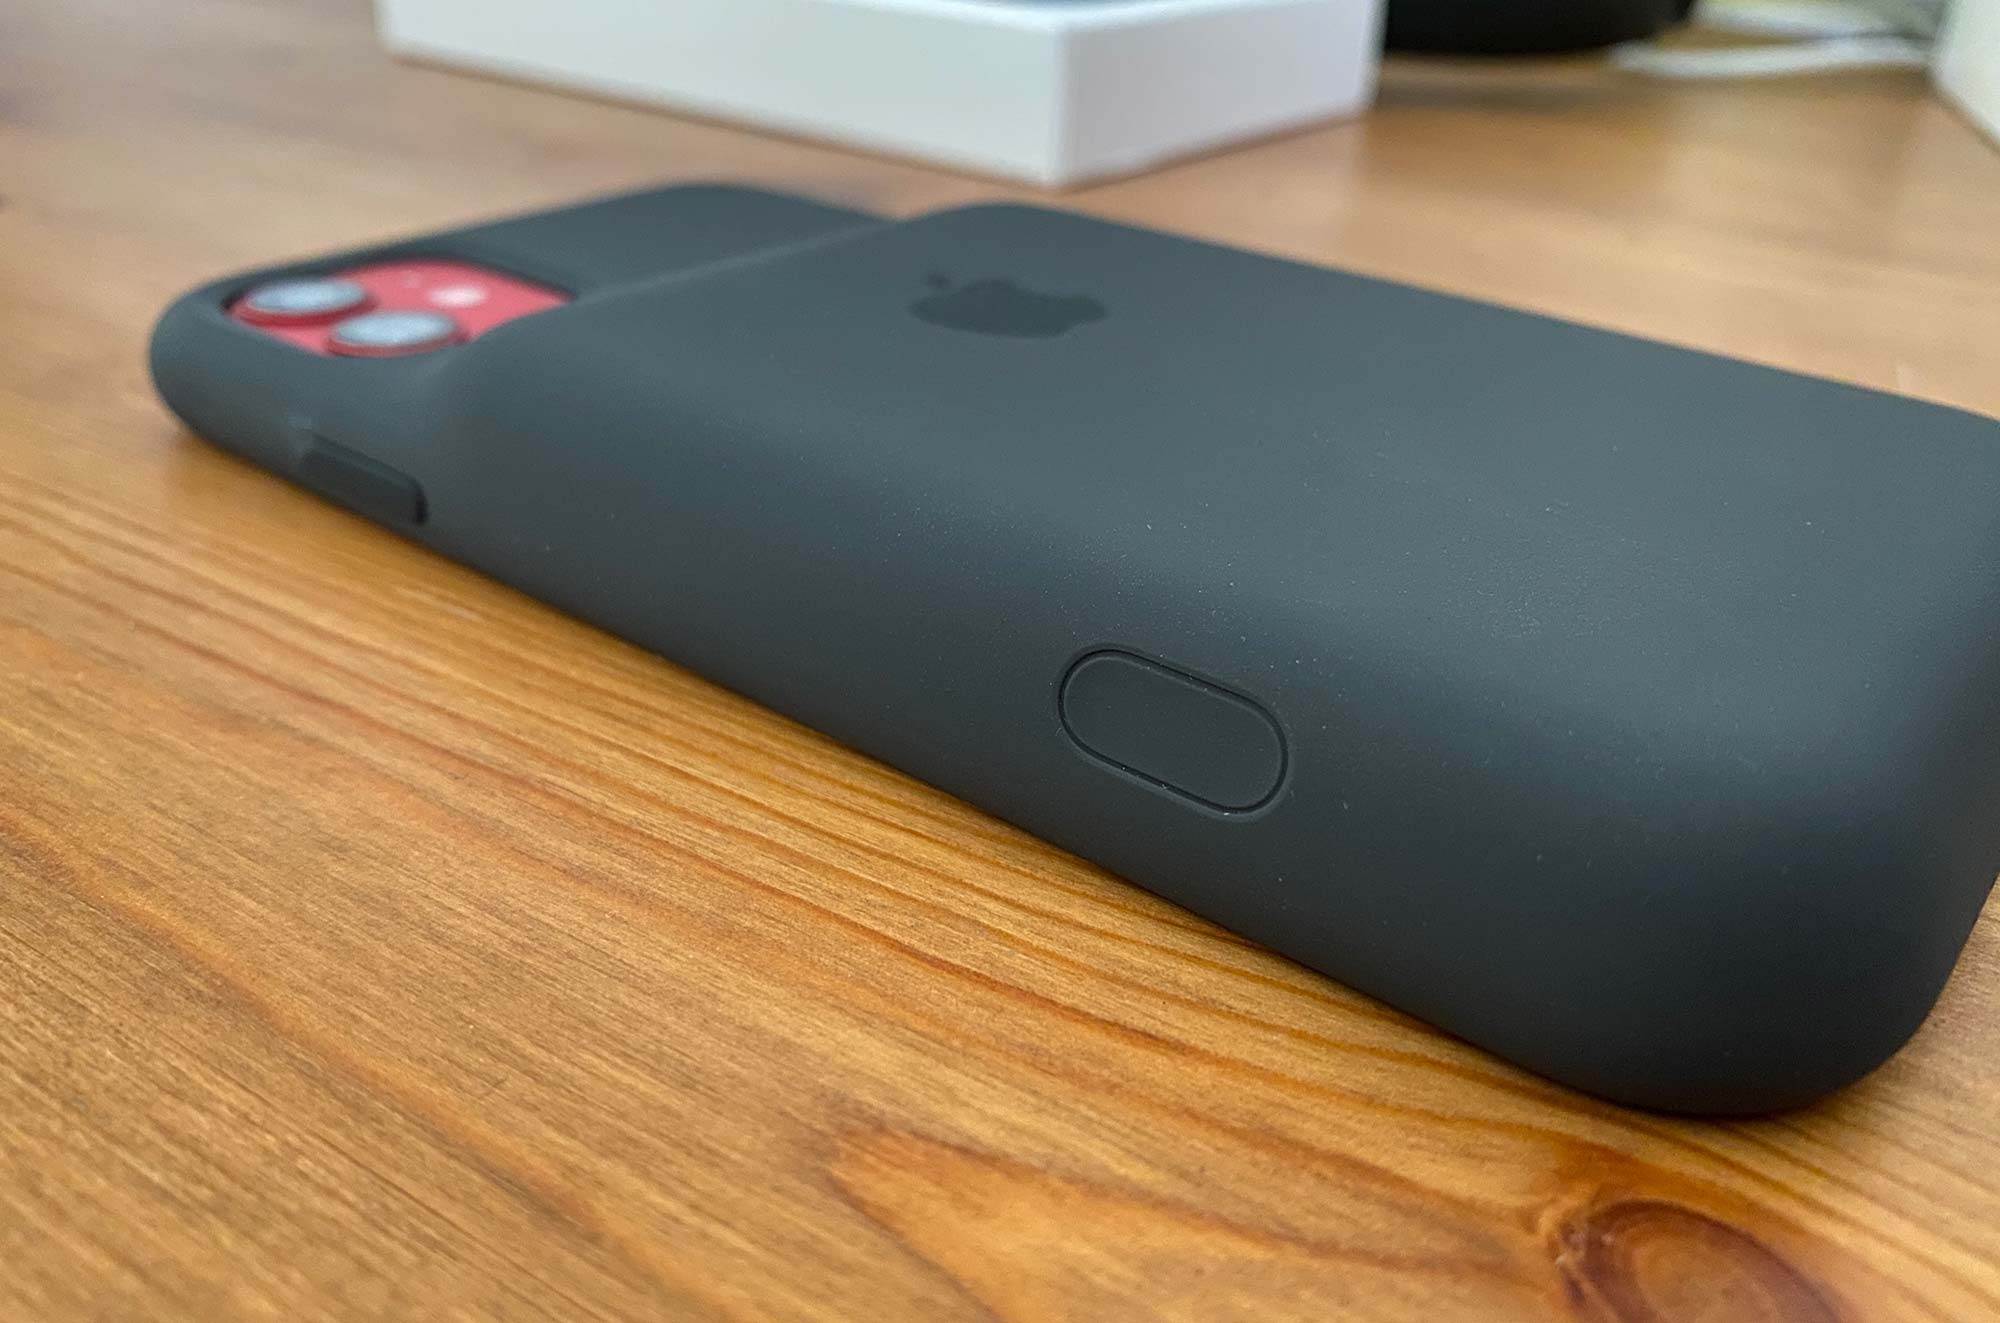 Apple's iPhone 11 battery cases bring juice in a thick case – Pickr